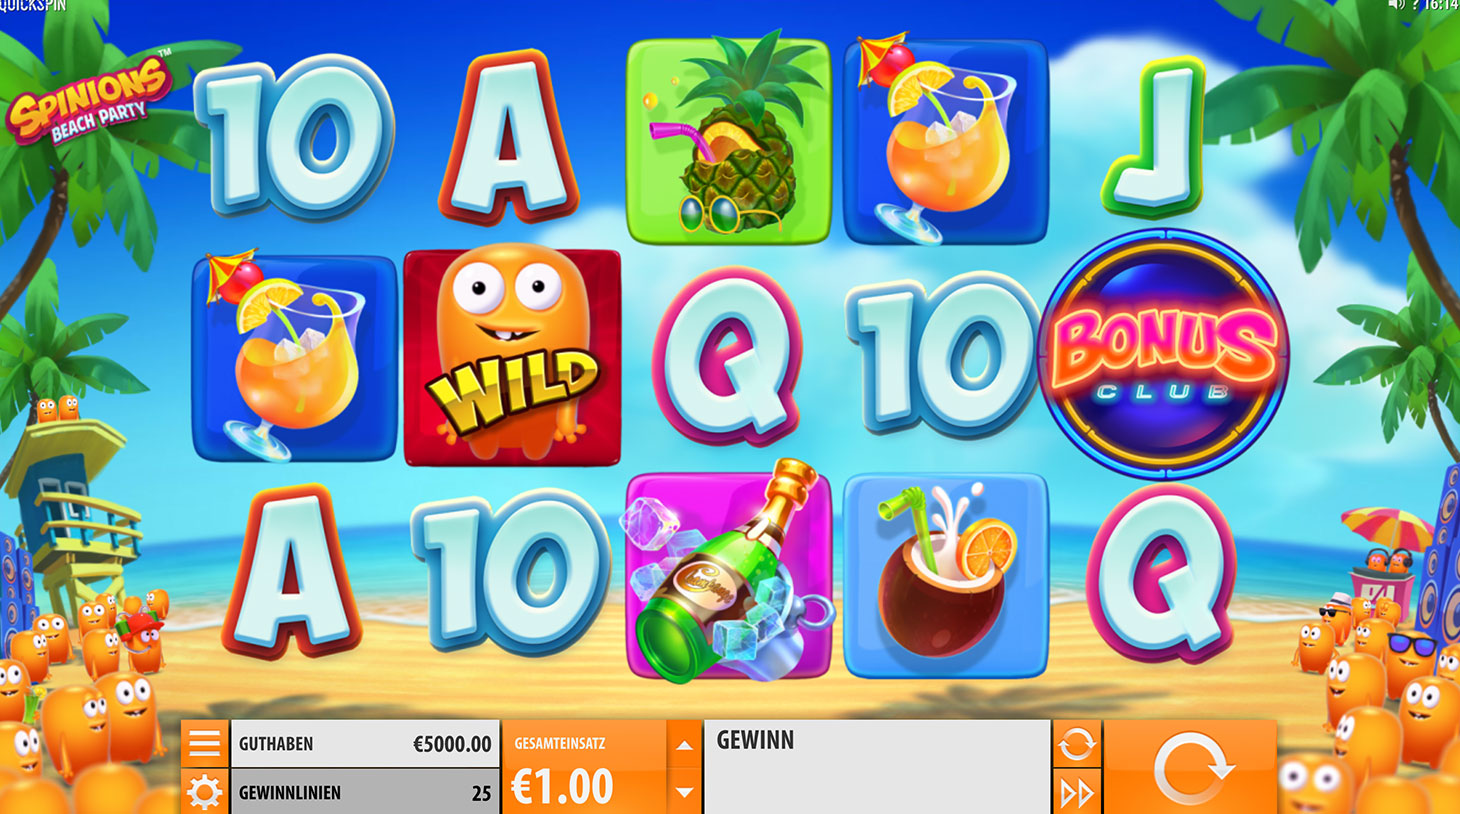 Spinions beach party slot